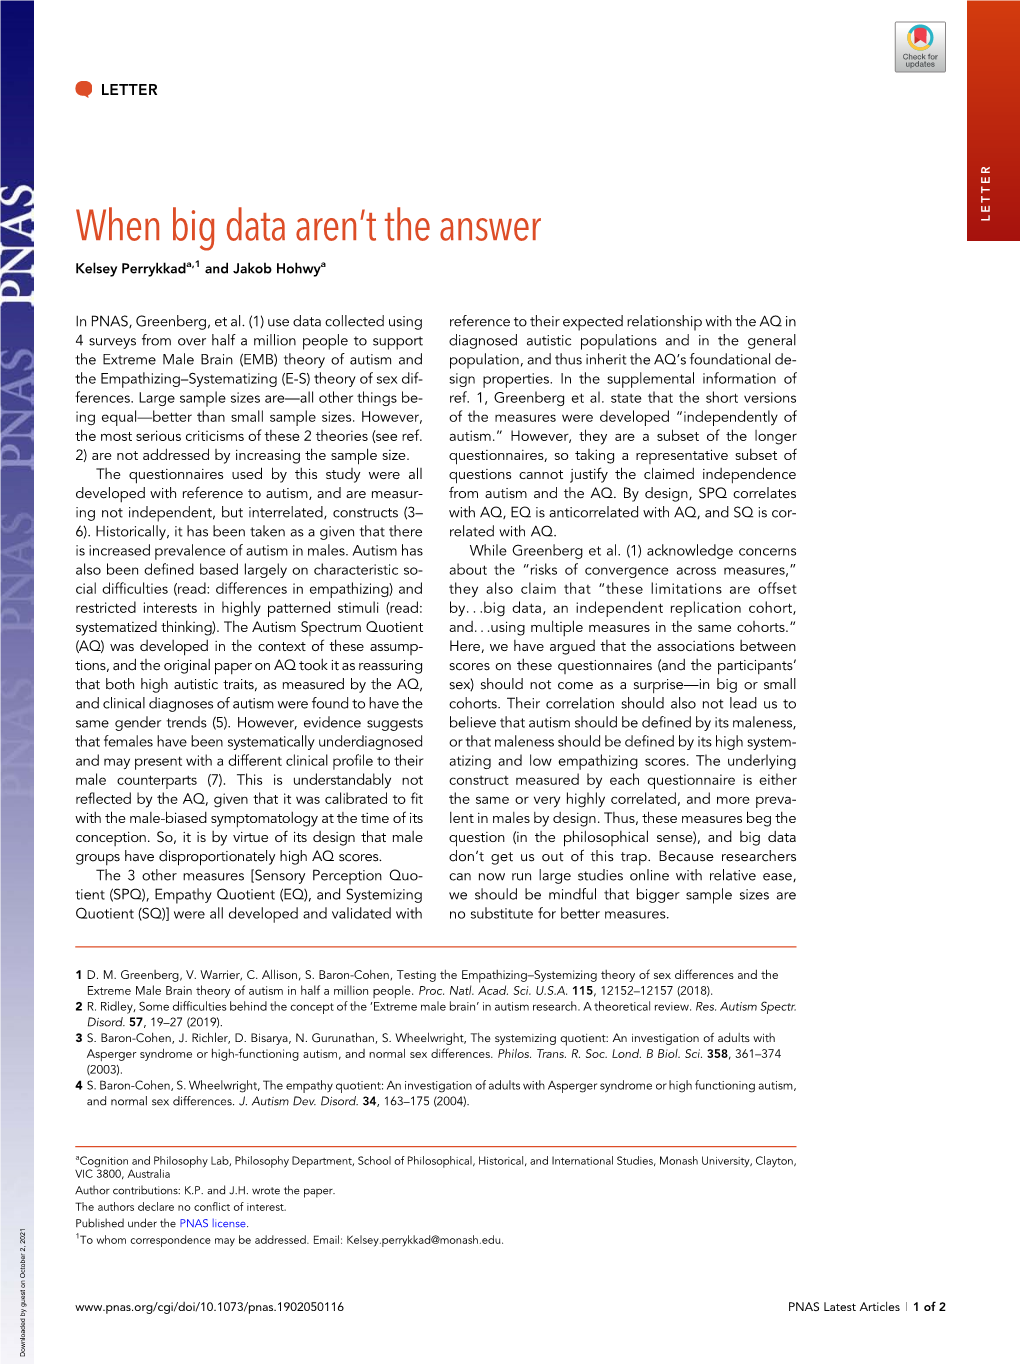 When Big Data Aren't the Answer